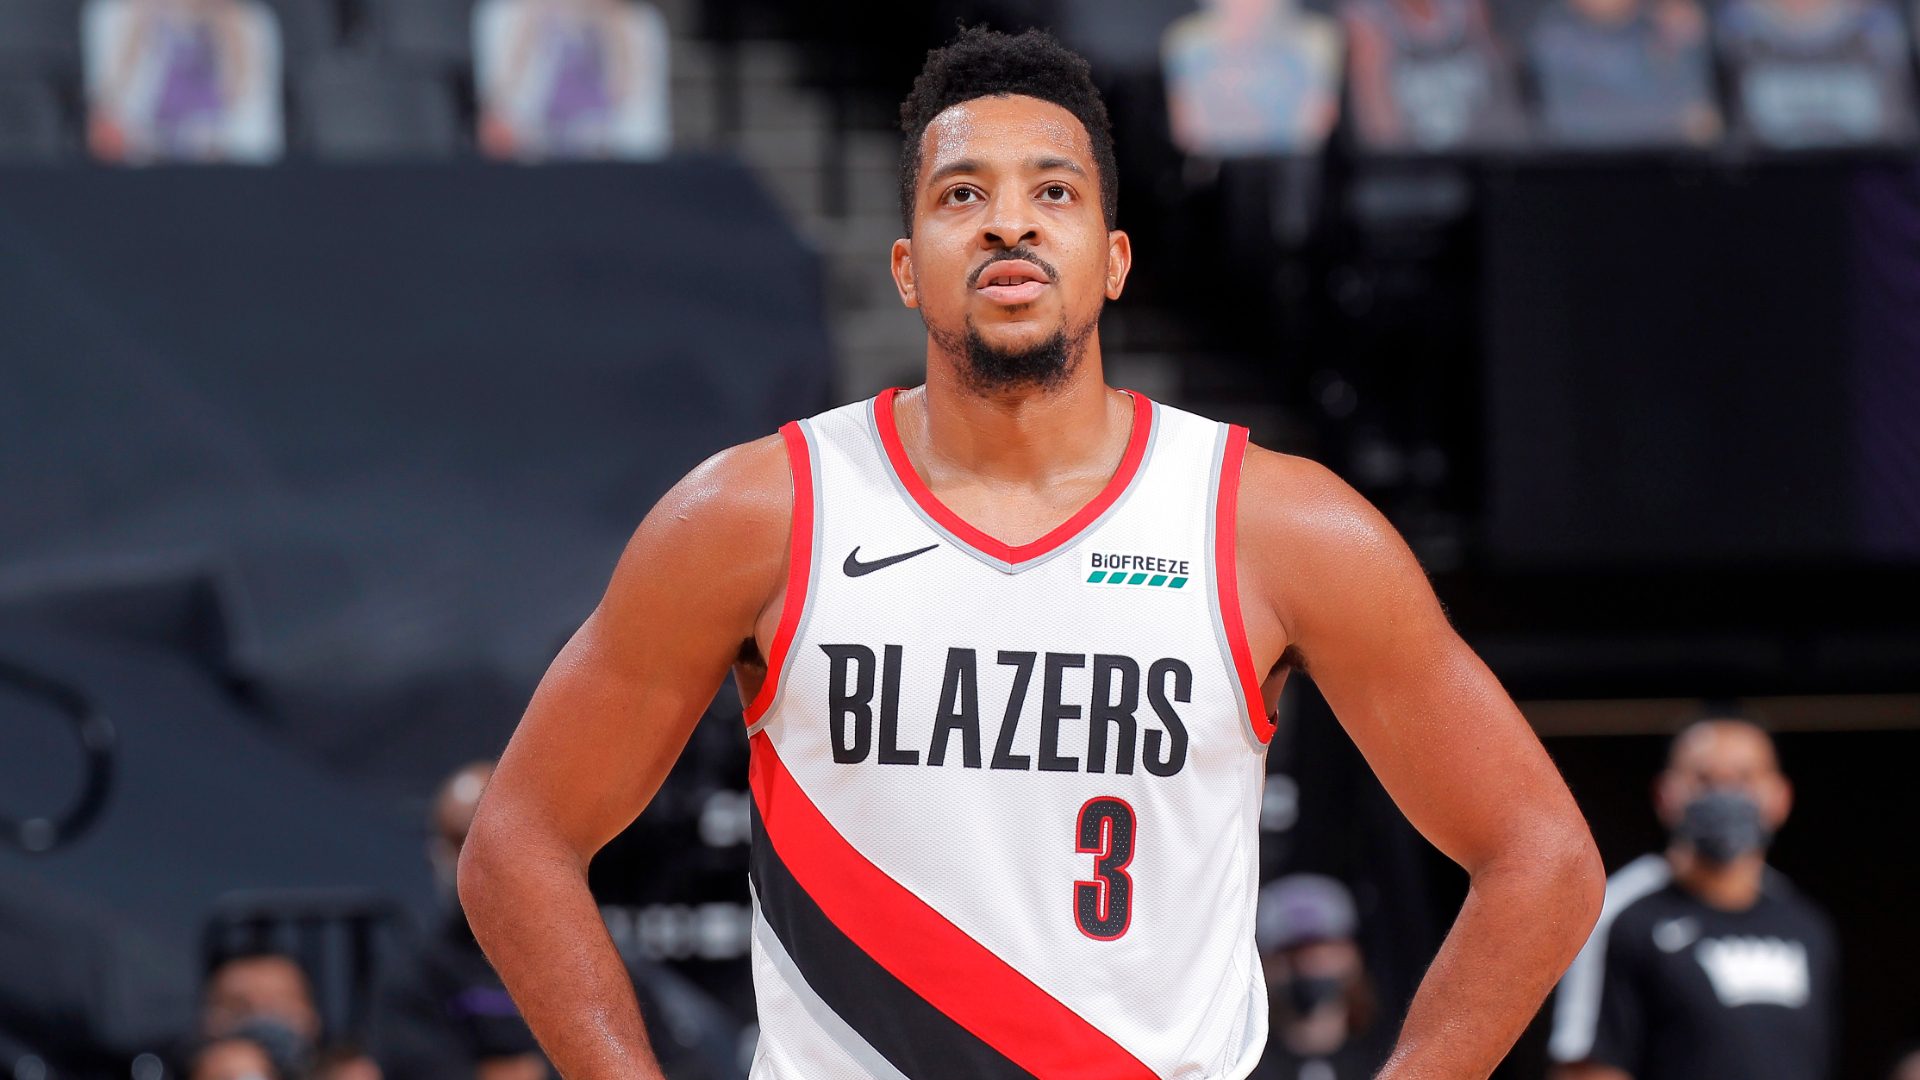 Blazers’ C.J. McCollum Out Indefinitely With Collapsed Lung